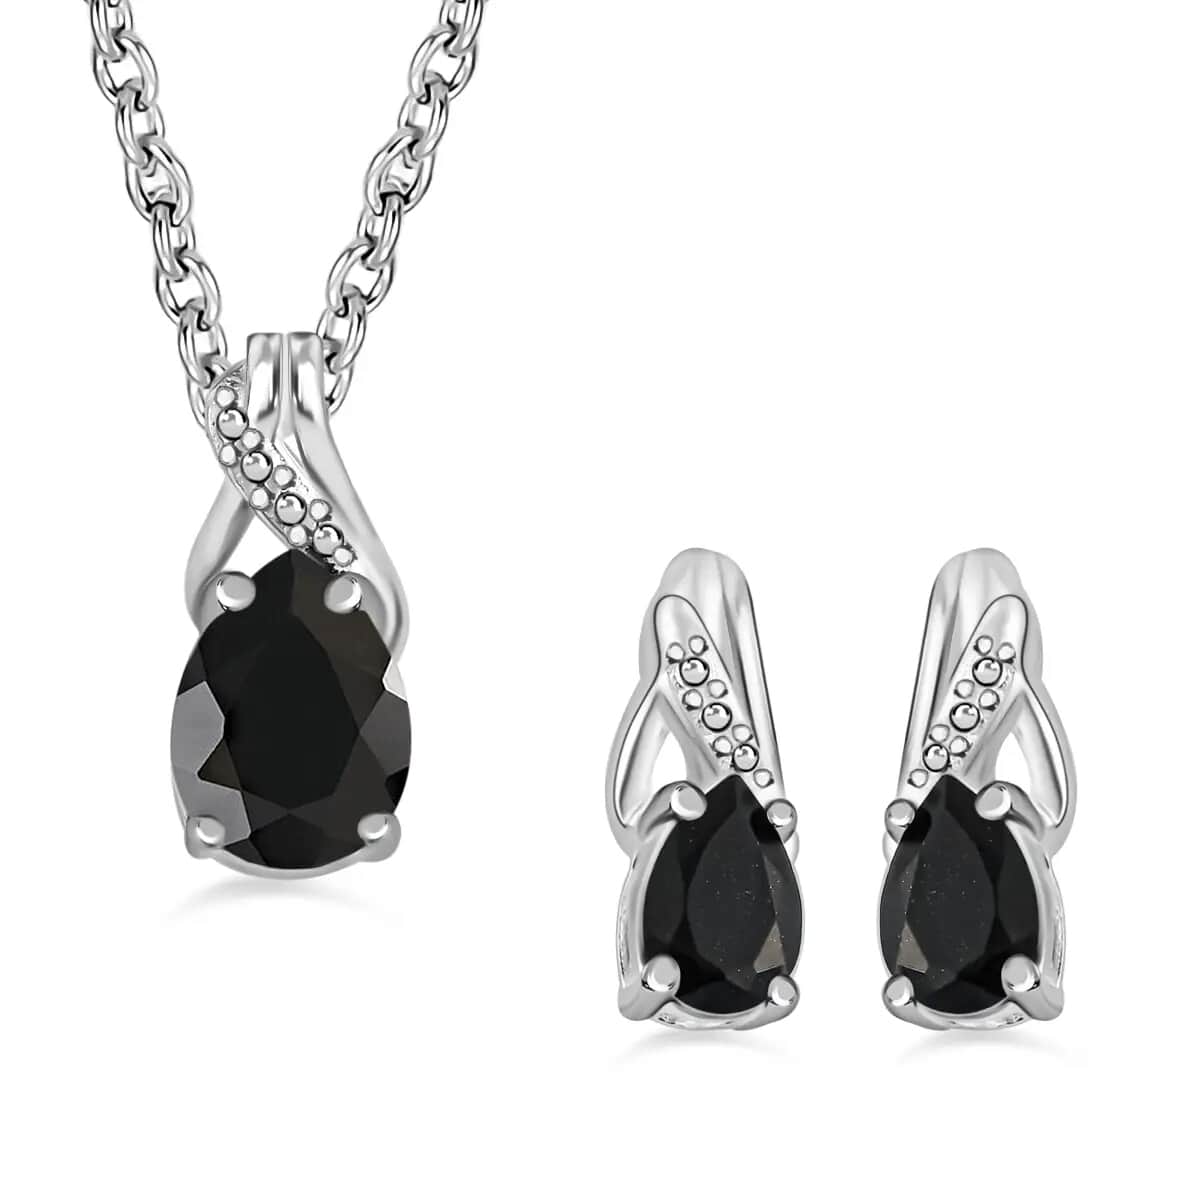 Australian Black Tourmaline Earrings and Pendant Necklace Jewelry Set, Sterling Silver and Stainless Steel Jewelry Set, Set of Tourmaline Earrings and Tourmaline Pendant Necklace 1.85 ctw image number 0